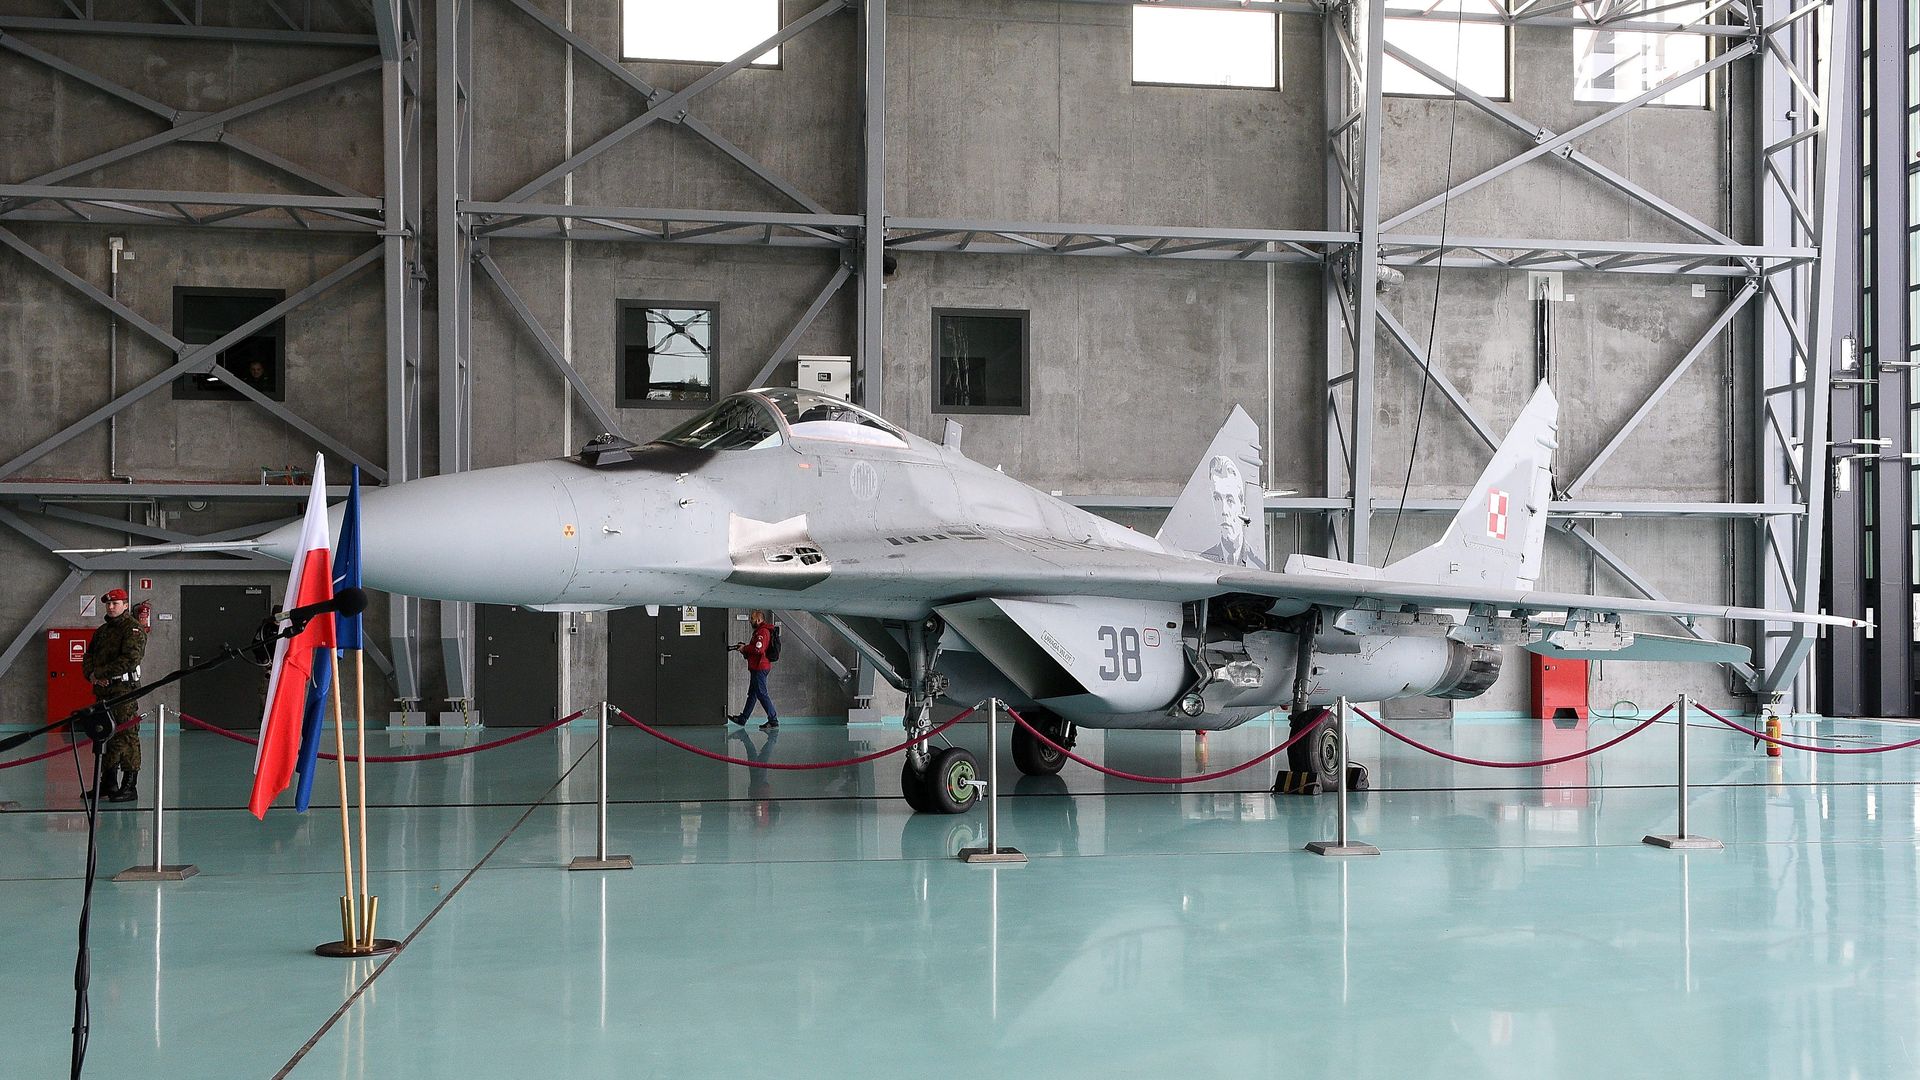 A Polish MiG fighter jet is seen in a hangar in Warsaw.